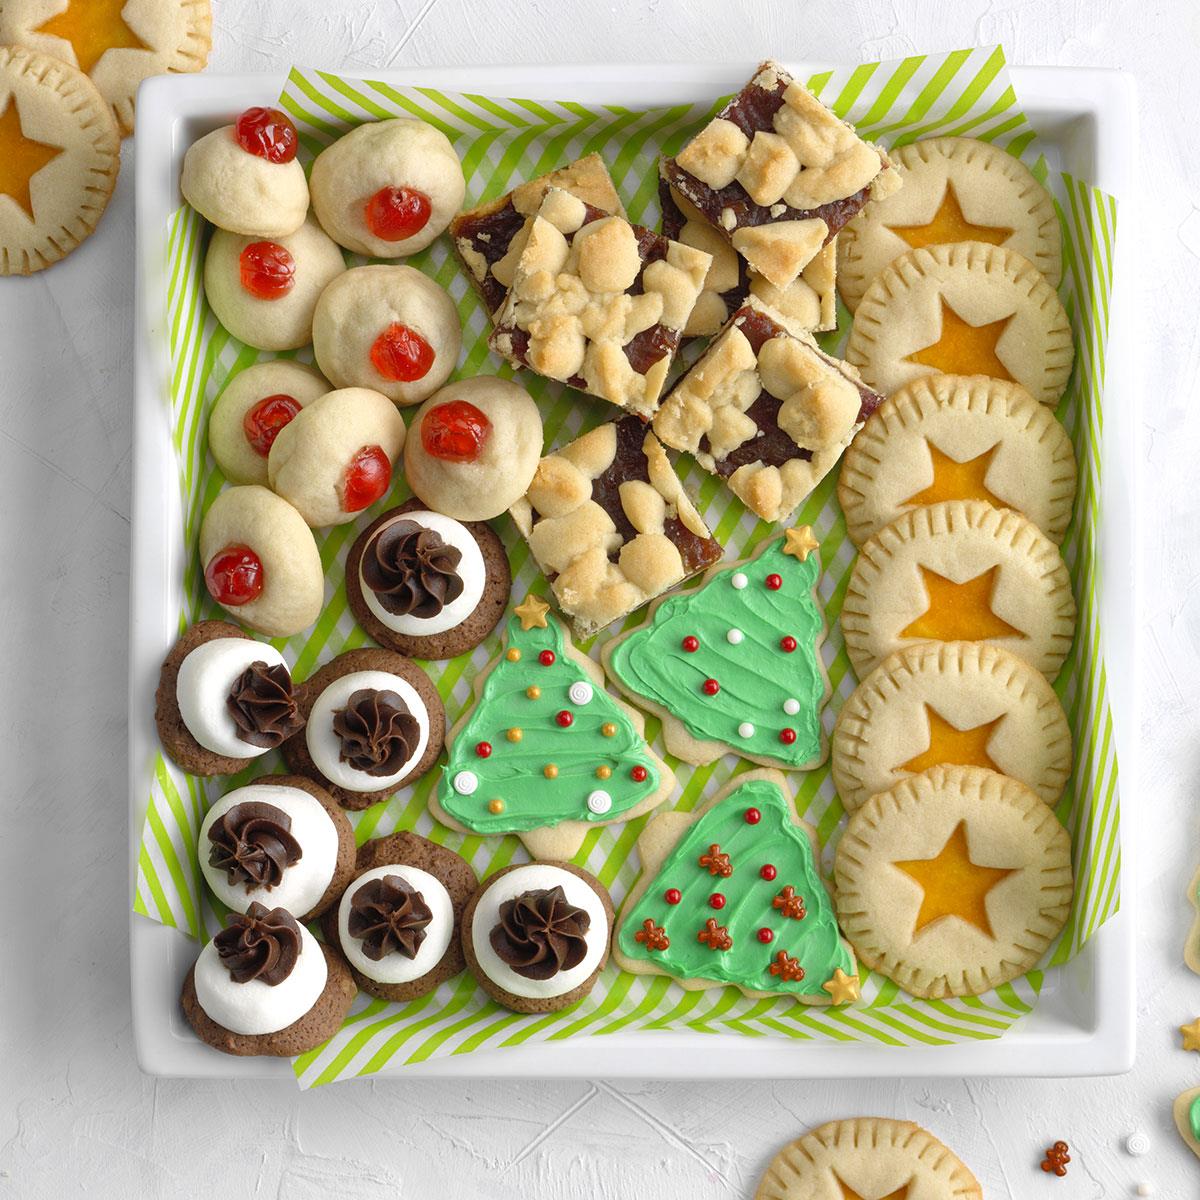 Today's Home Bakers Share Their Secrets to the Best Cookie Platters Ever